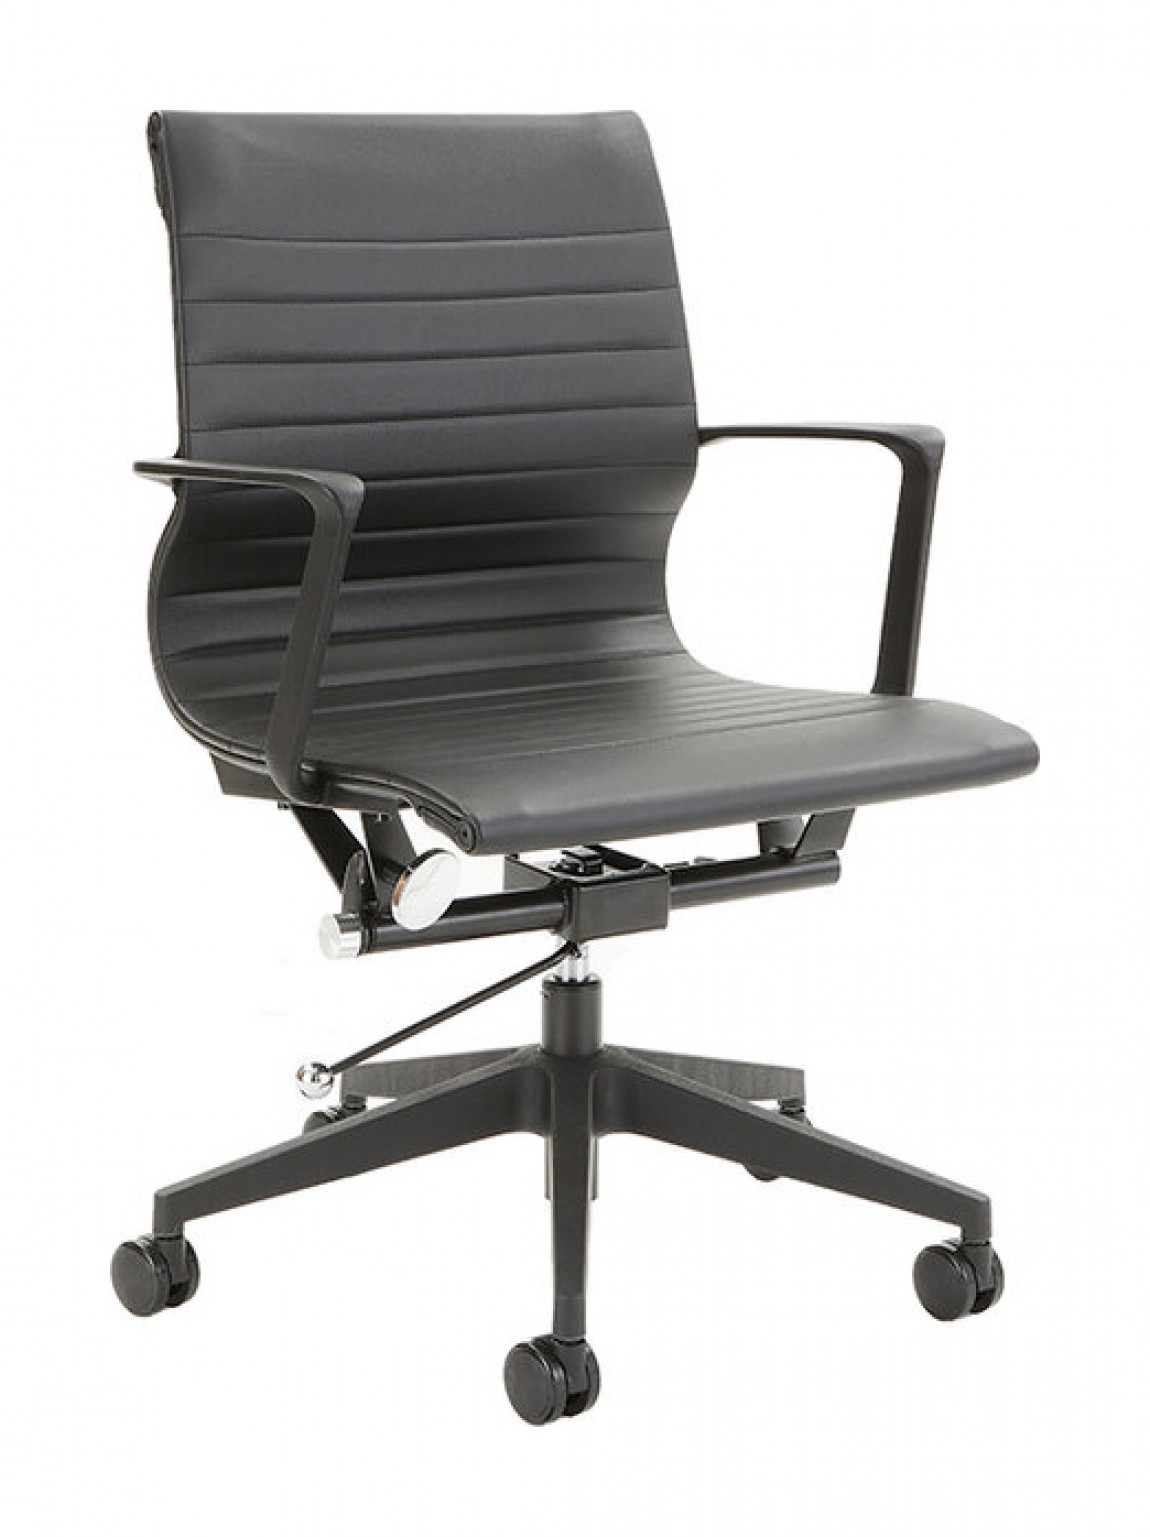 Conference room chair